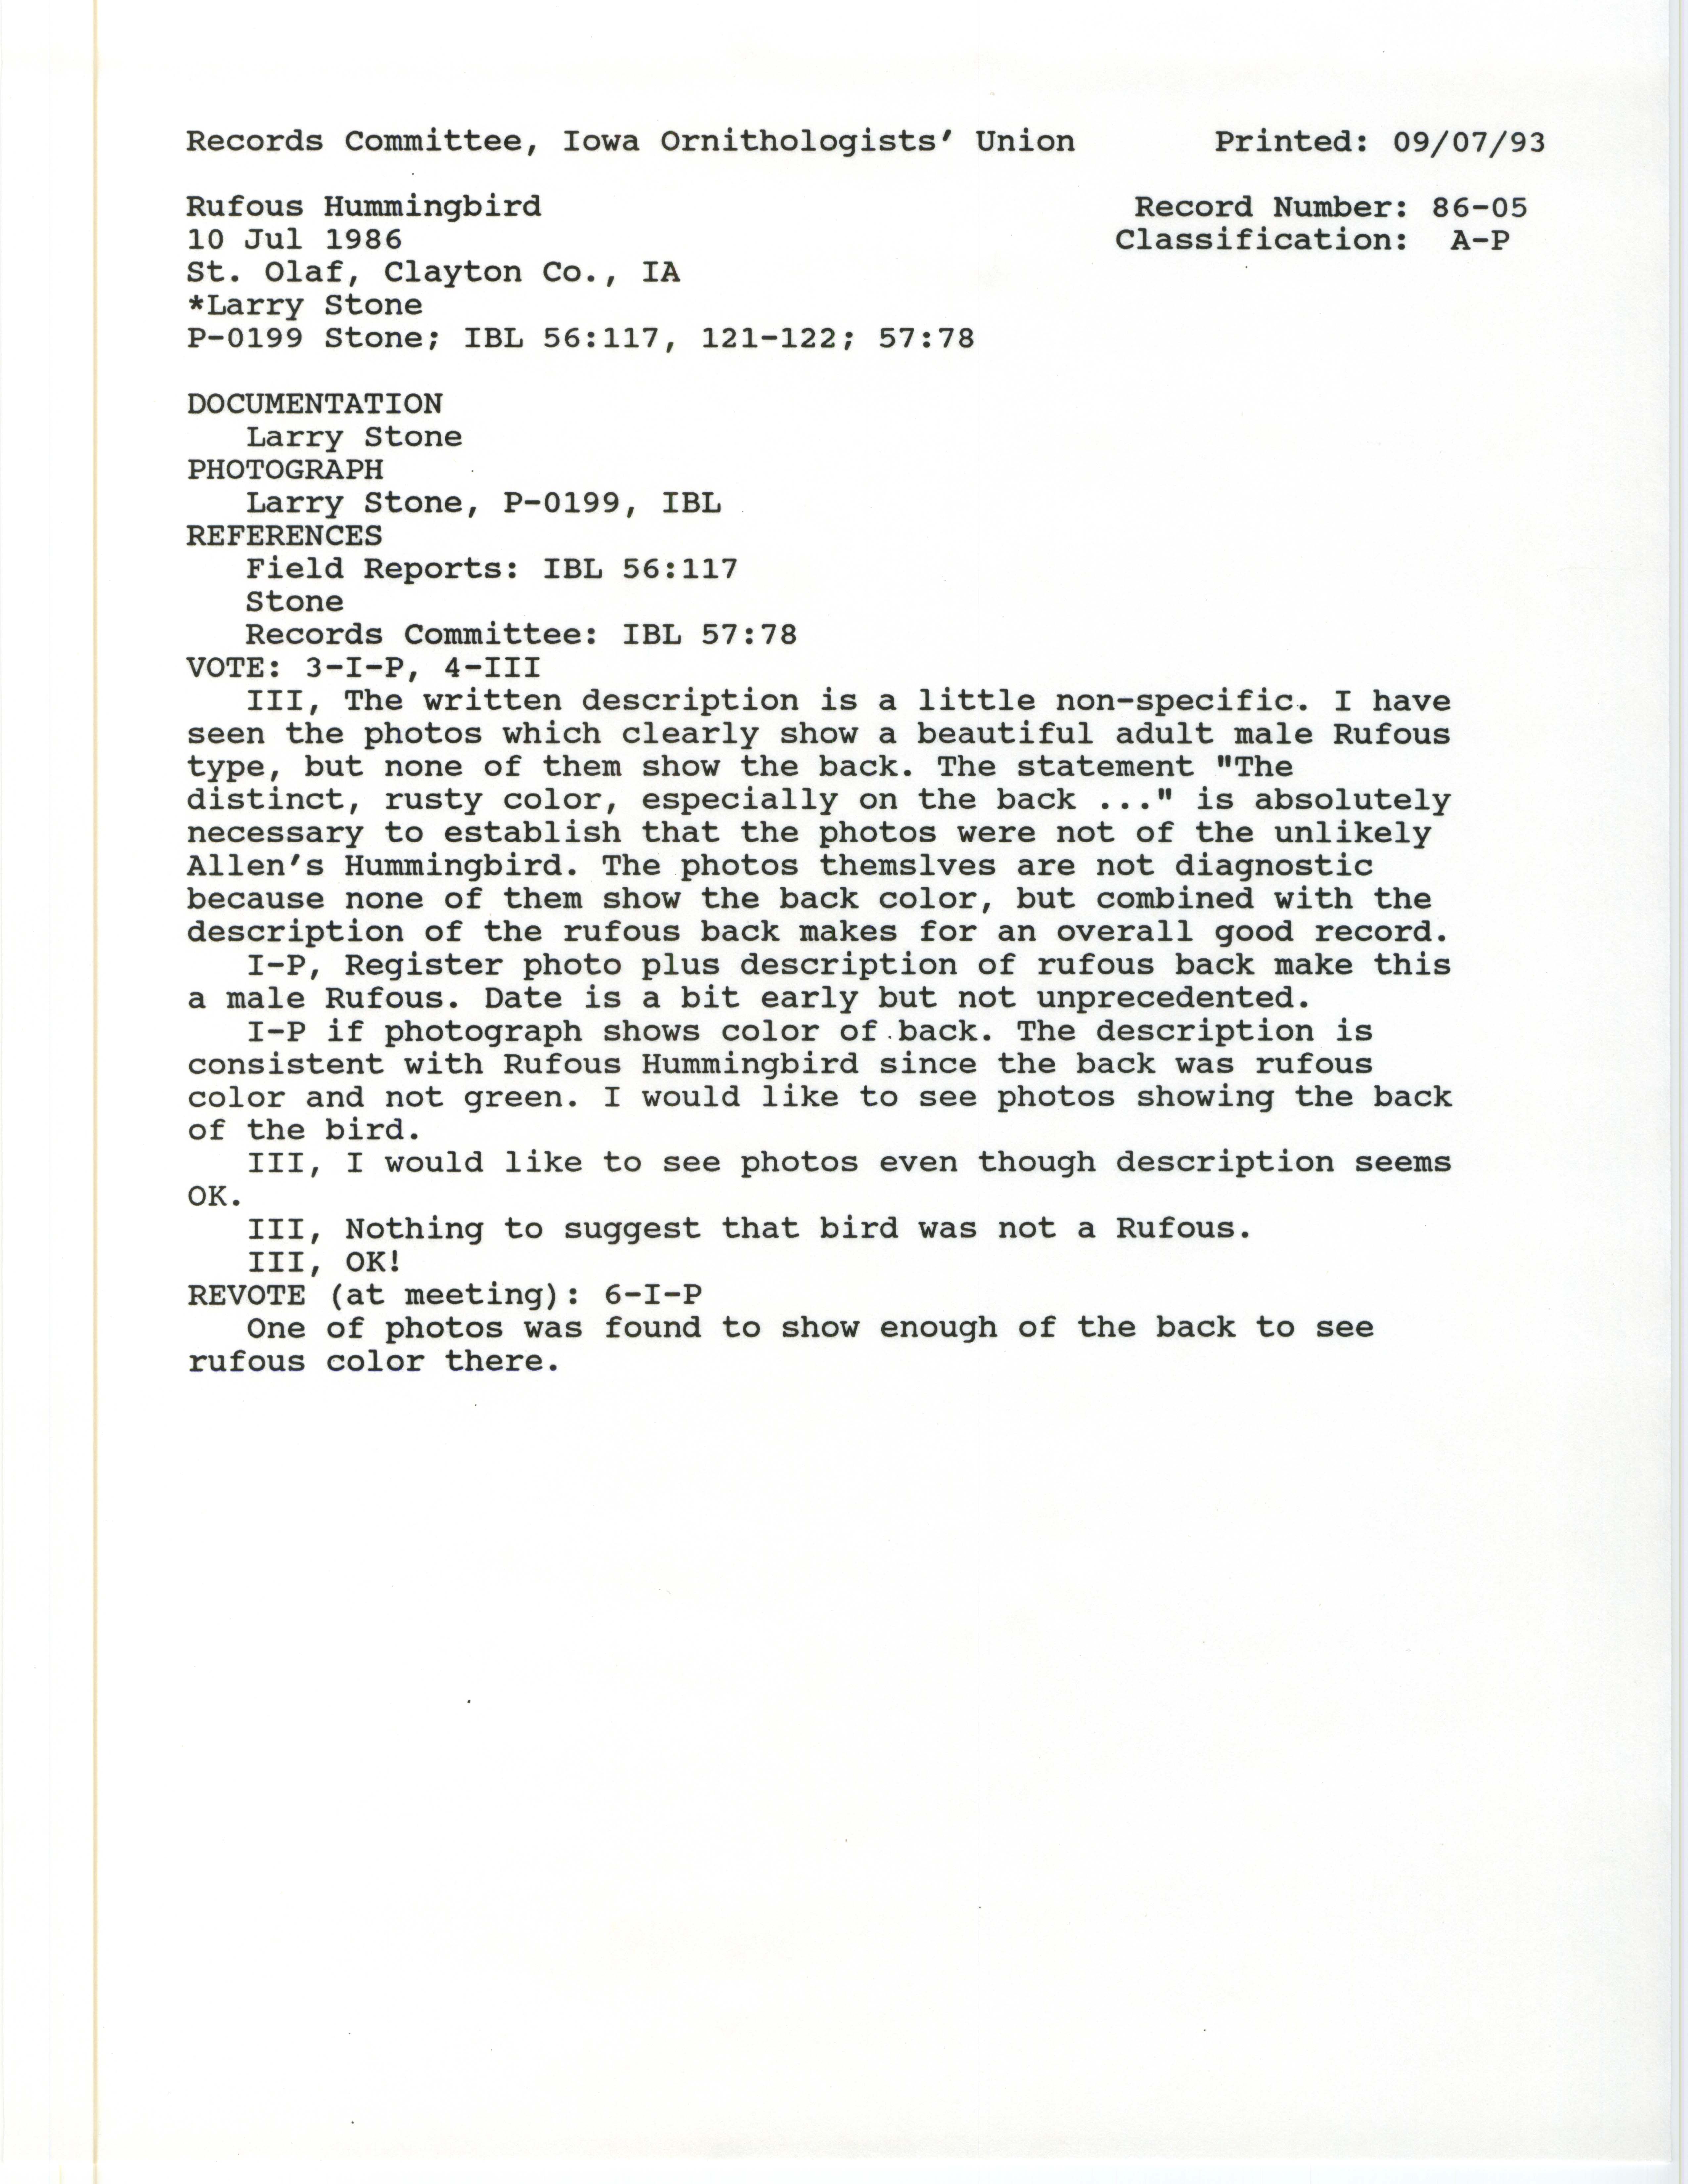 Records Committee review for rare bird sighting for Rufous Hummingbird at St. Olaf, 1986